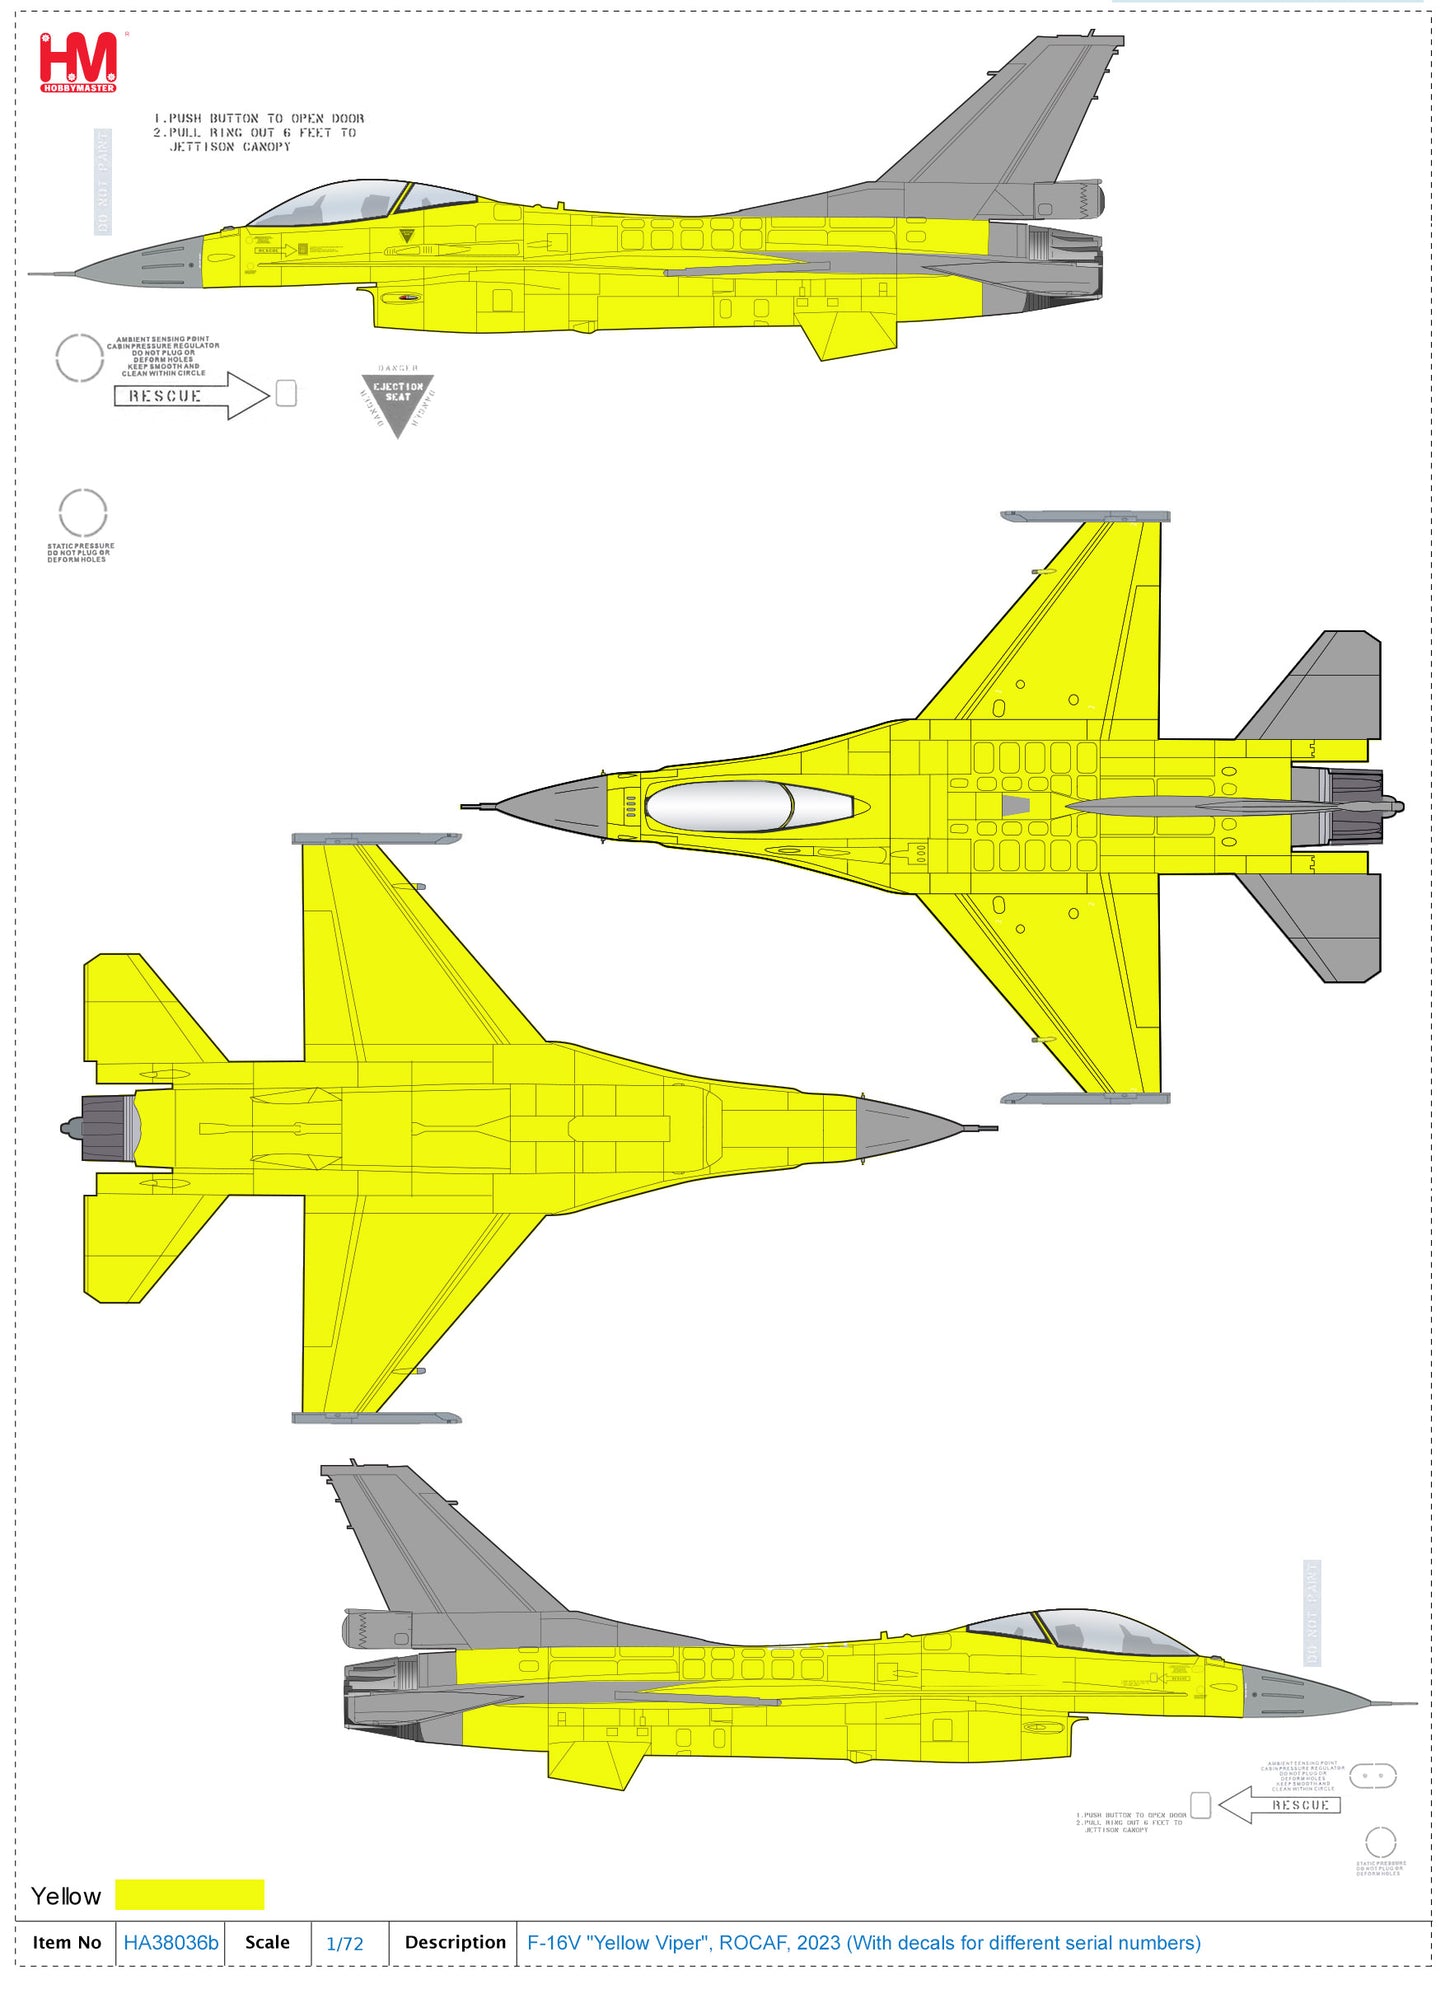 Pre Order Hobby Master HA38036B 1:72 F-16V F-16V "Yellow Viper" ROCAF, 2023 (with decals for different airplanes)